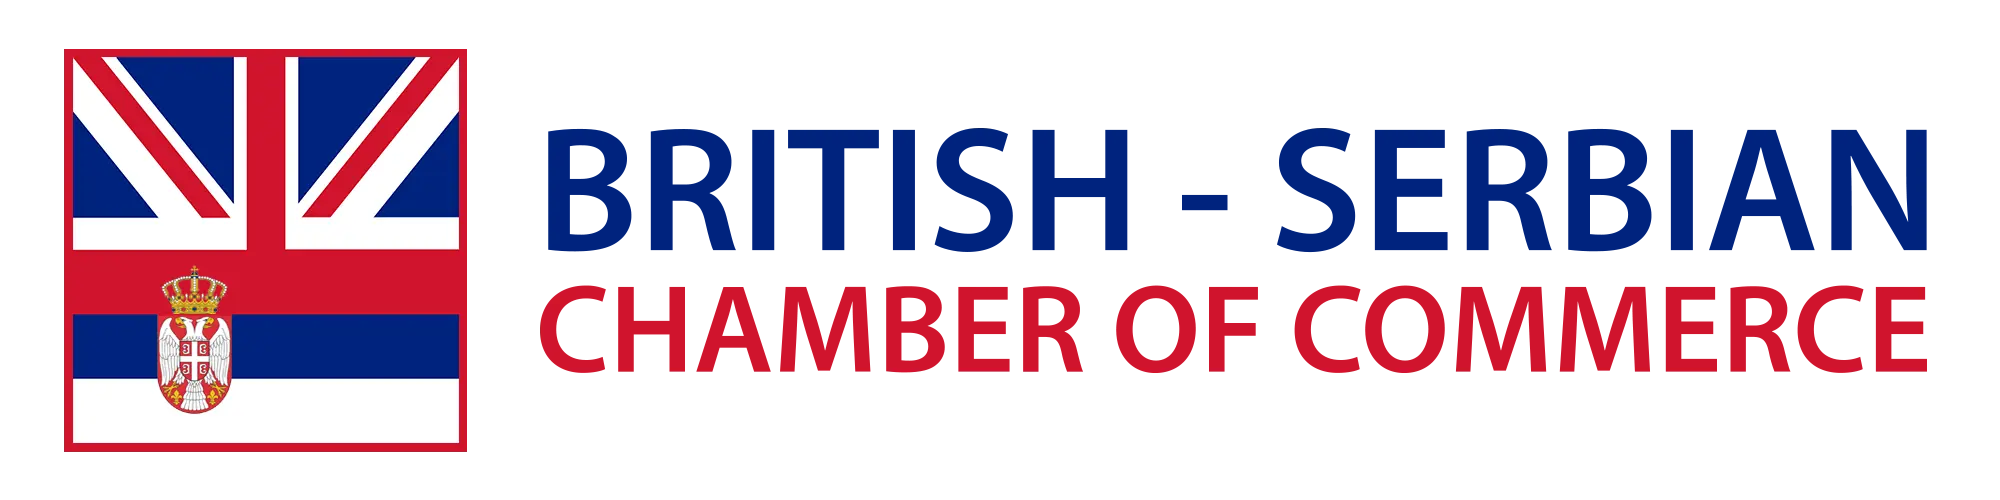 British Serbian Chamber of Commerce (BSCC) Accomplishes Its Mission and Improves Member Communication With Glue Up